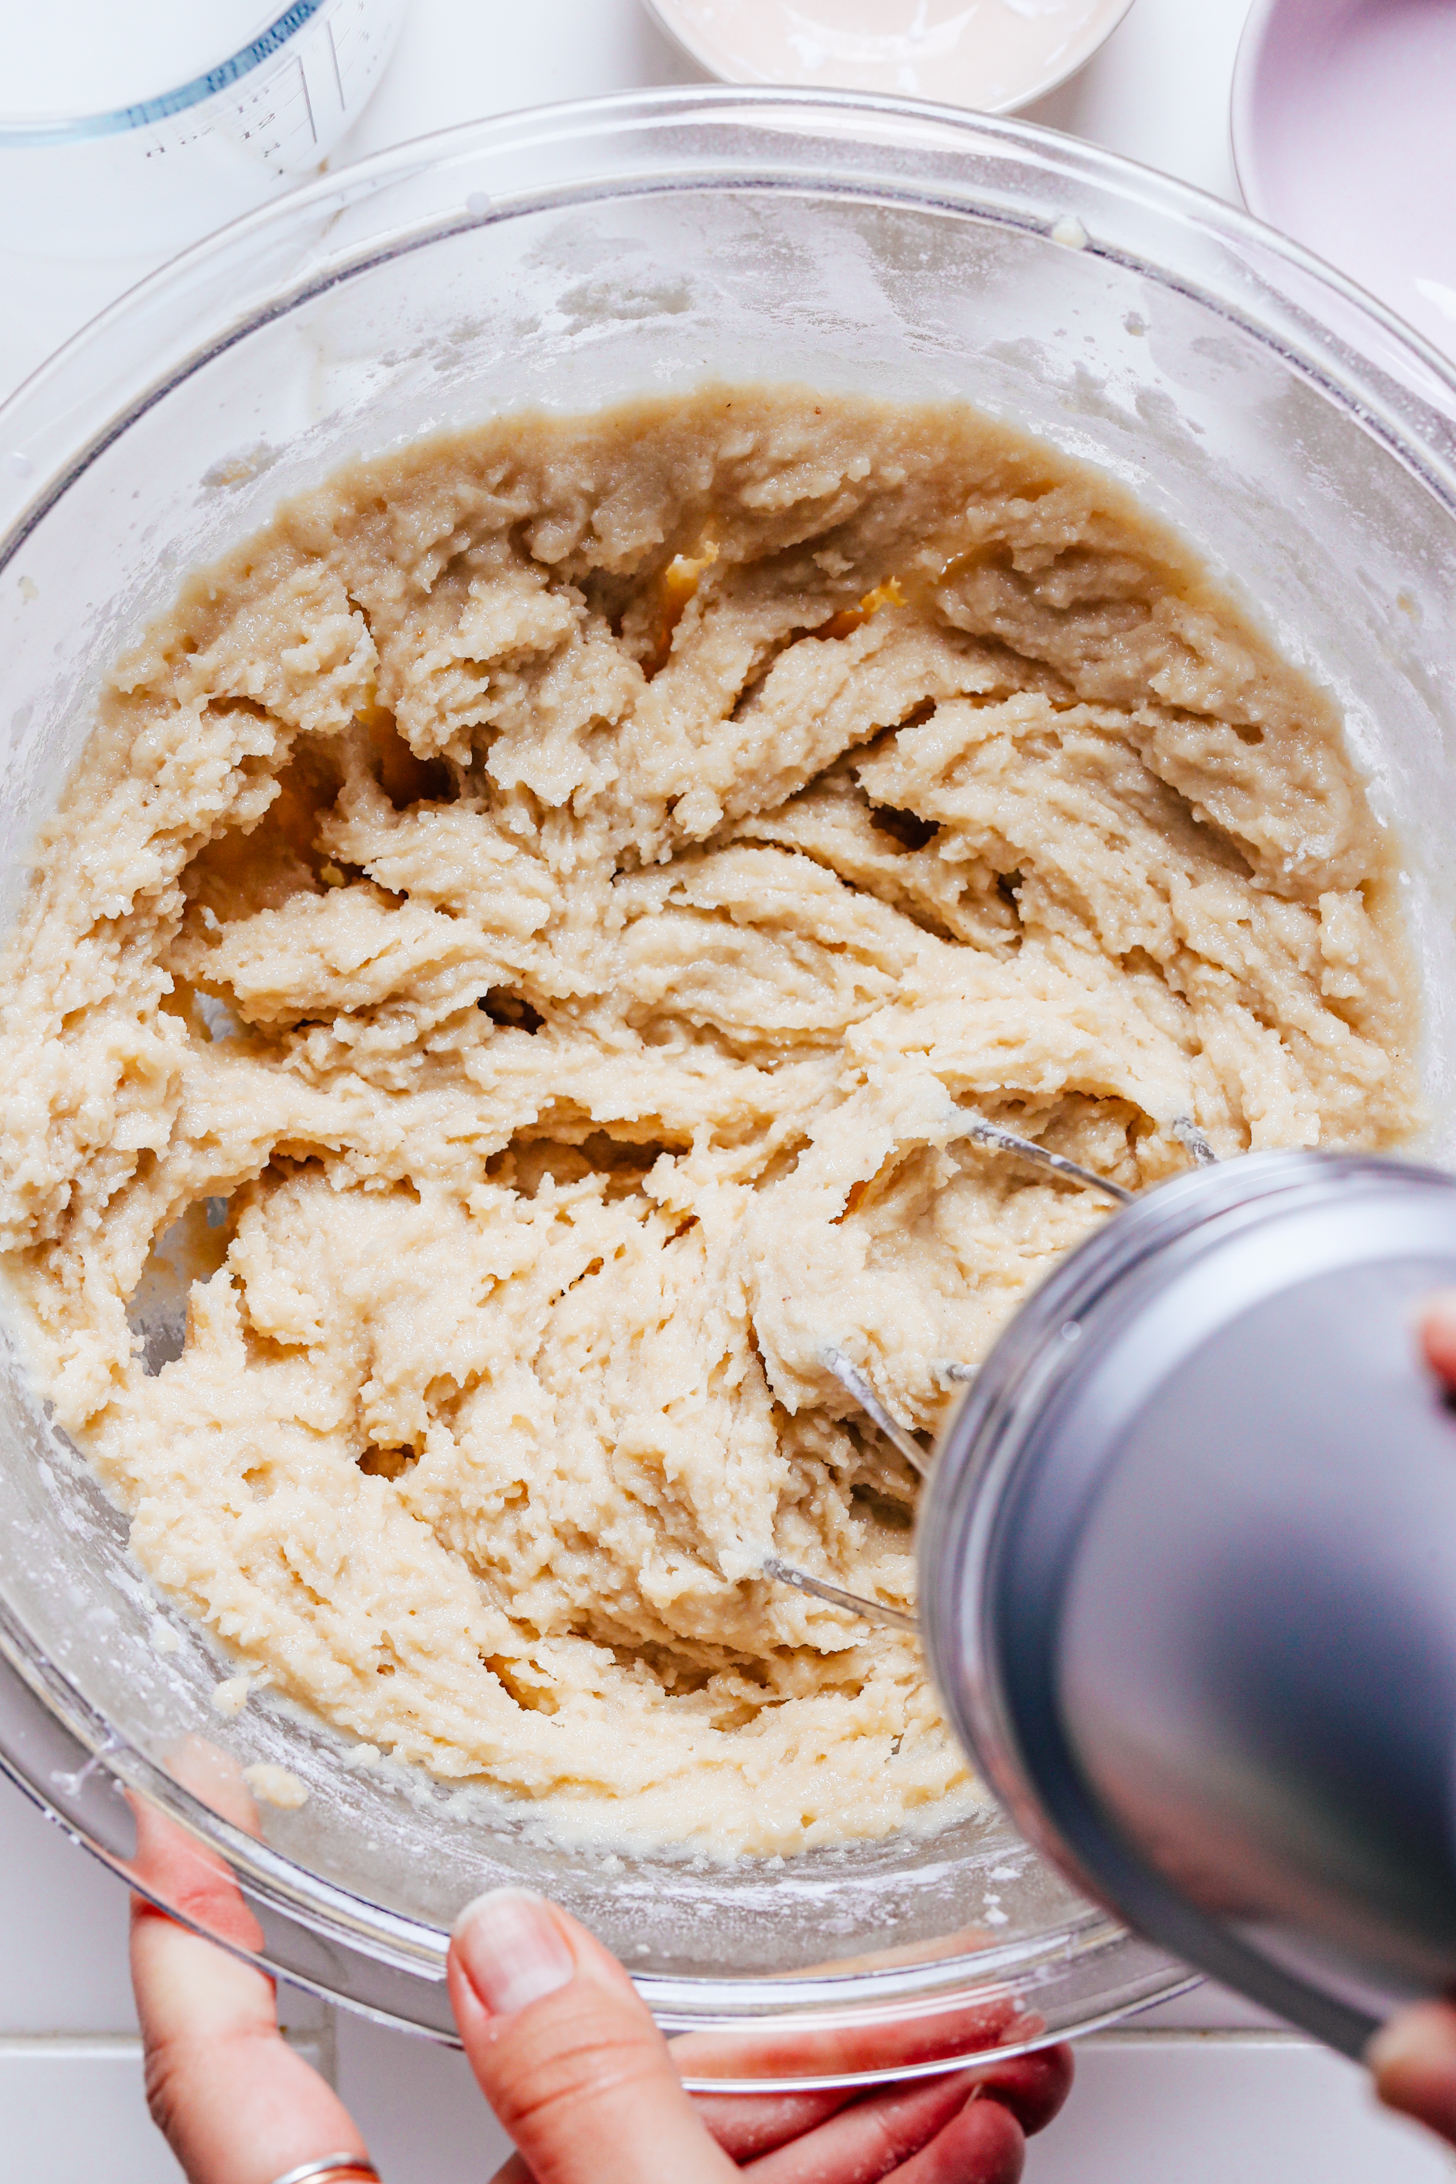 Using an electric mixer to combine the almond cake batter